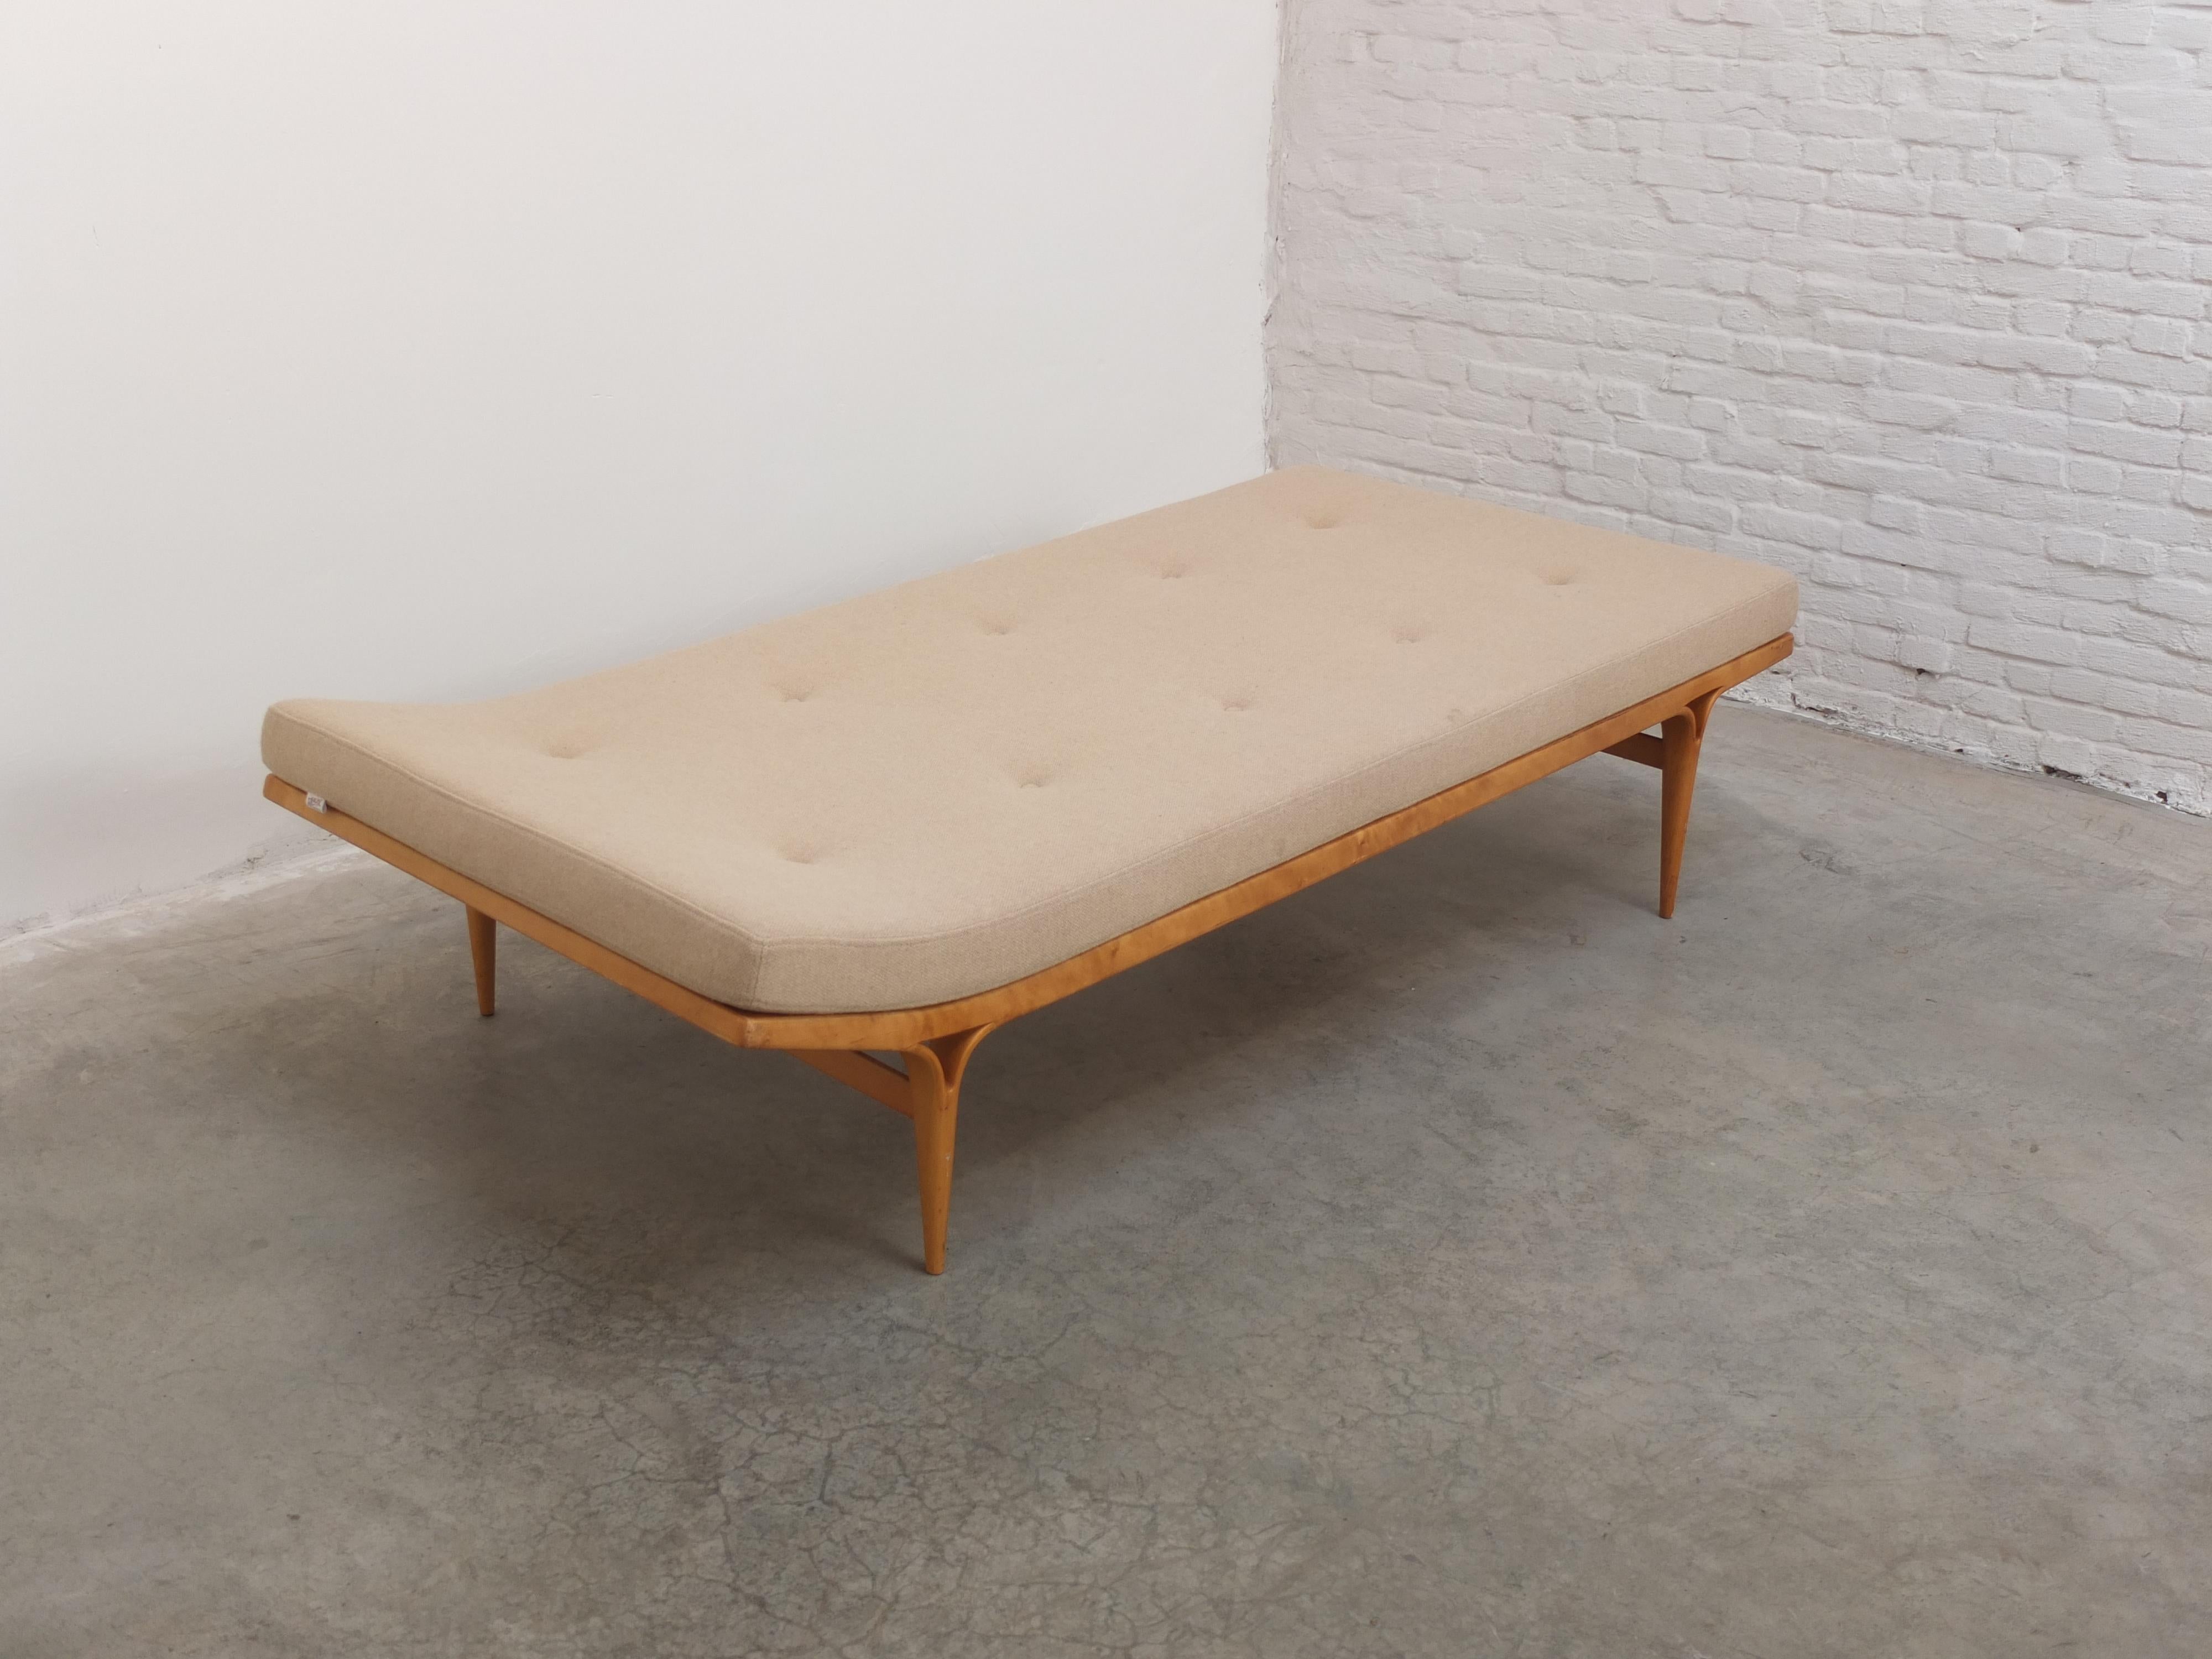 Rare 'Berlin' Daybed by Bruno Mathsson for Karl Mathsson, 1957 For Sale 6